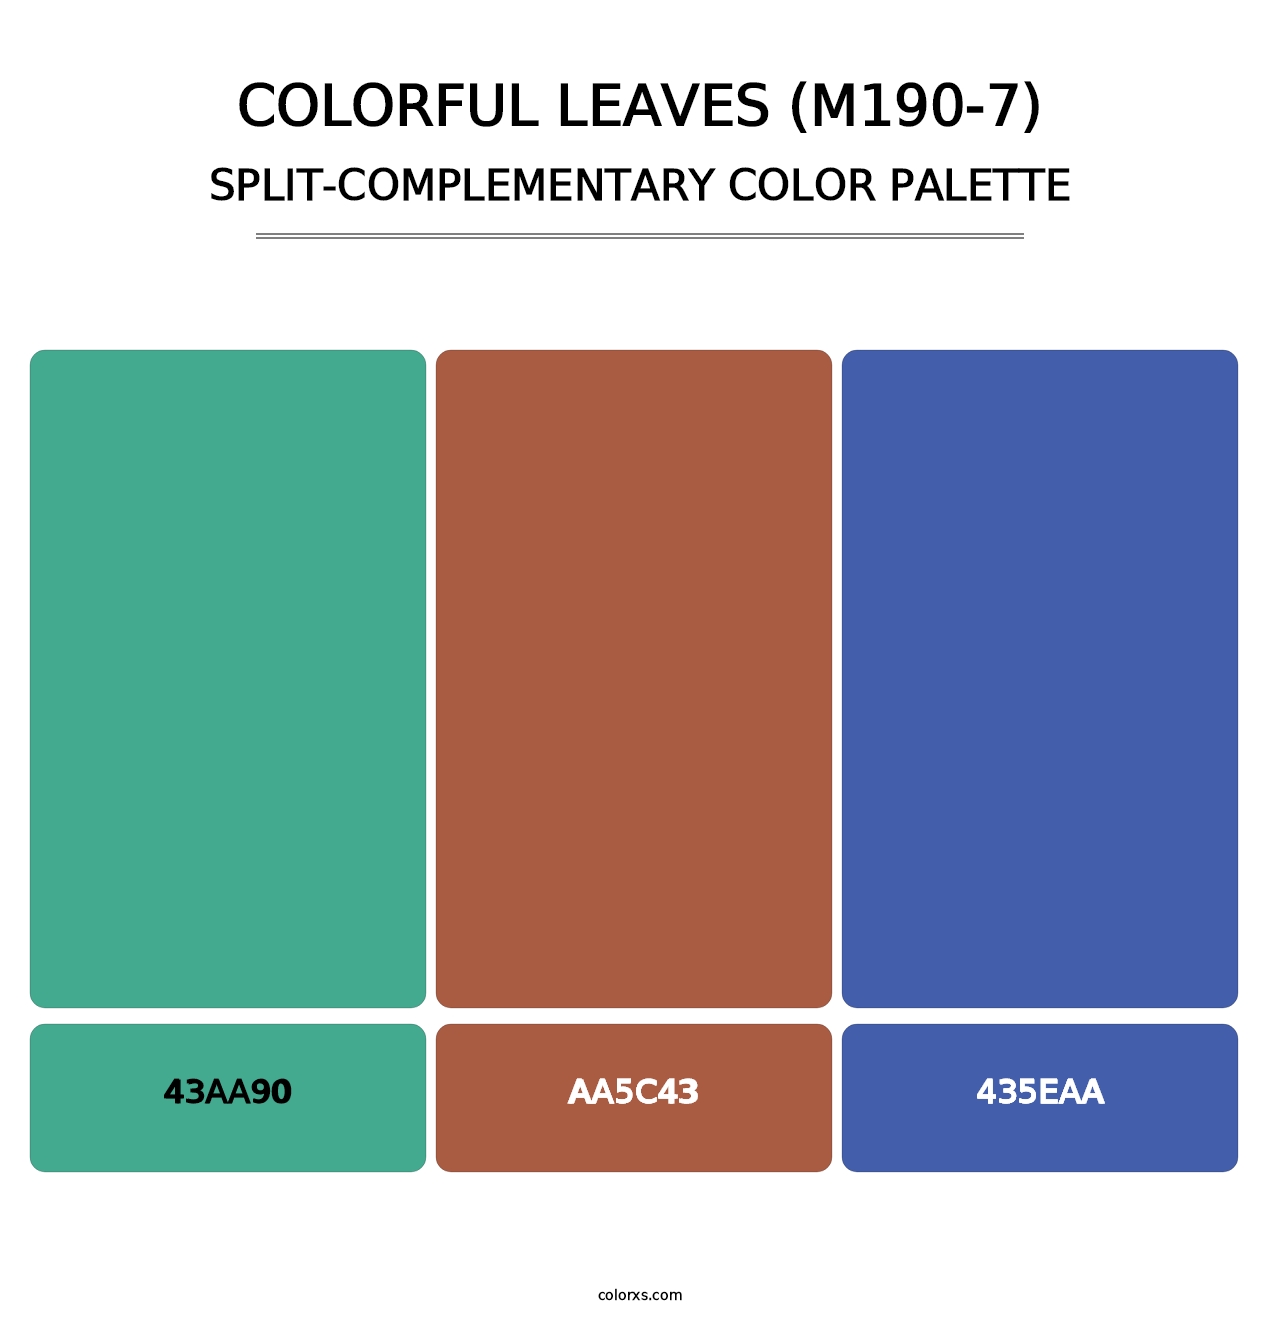 Colorful Leaves (M190-7) - Split-Complementary Color Palette